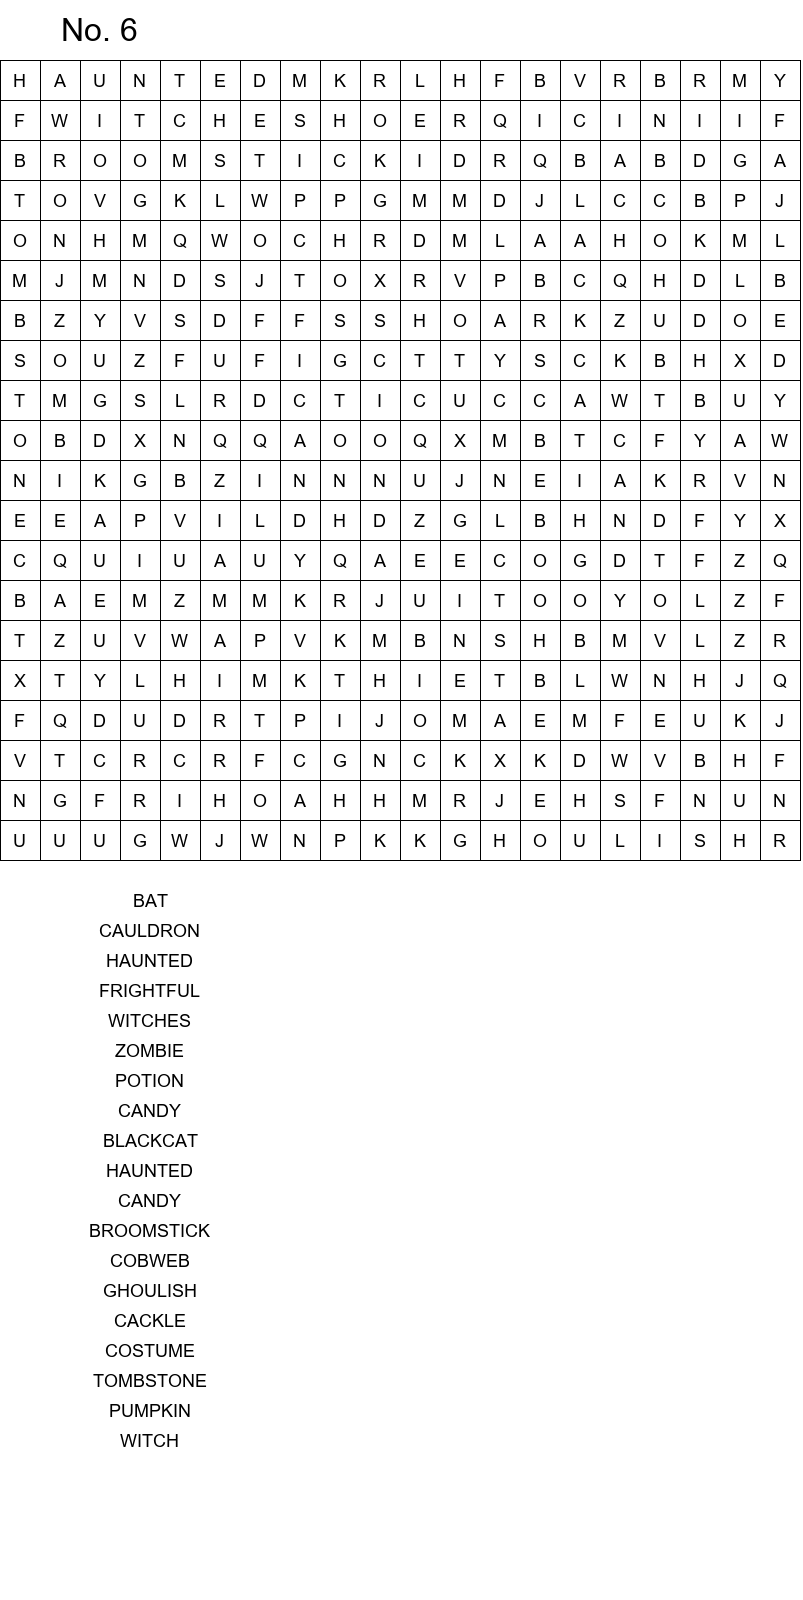 Halloween word search for middle school size 20x20 No 6